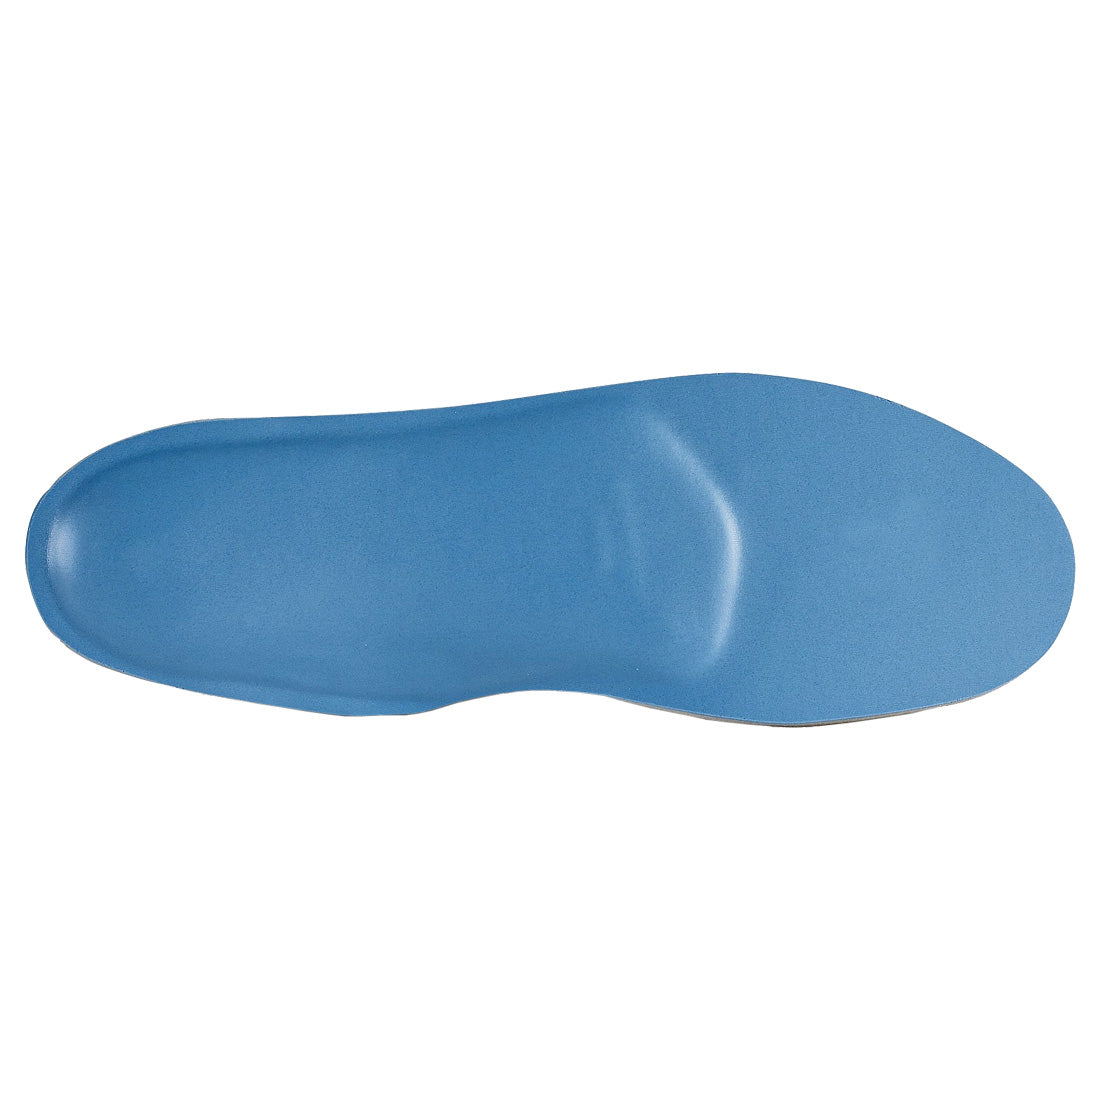 Aetrex Memory Foam Orthotic w/ Metatarsal Support for Med/High Arch - Women's